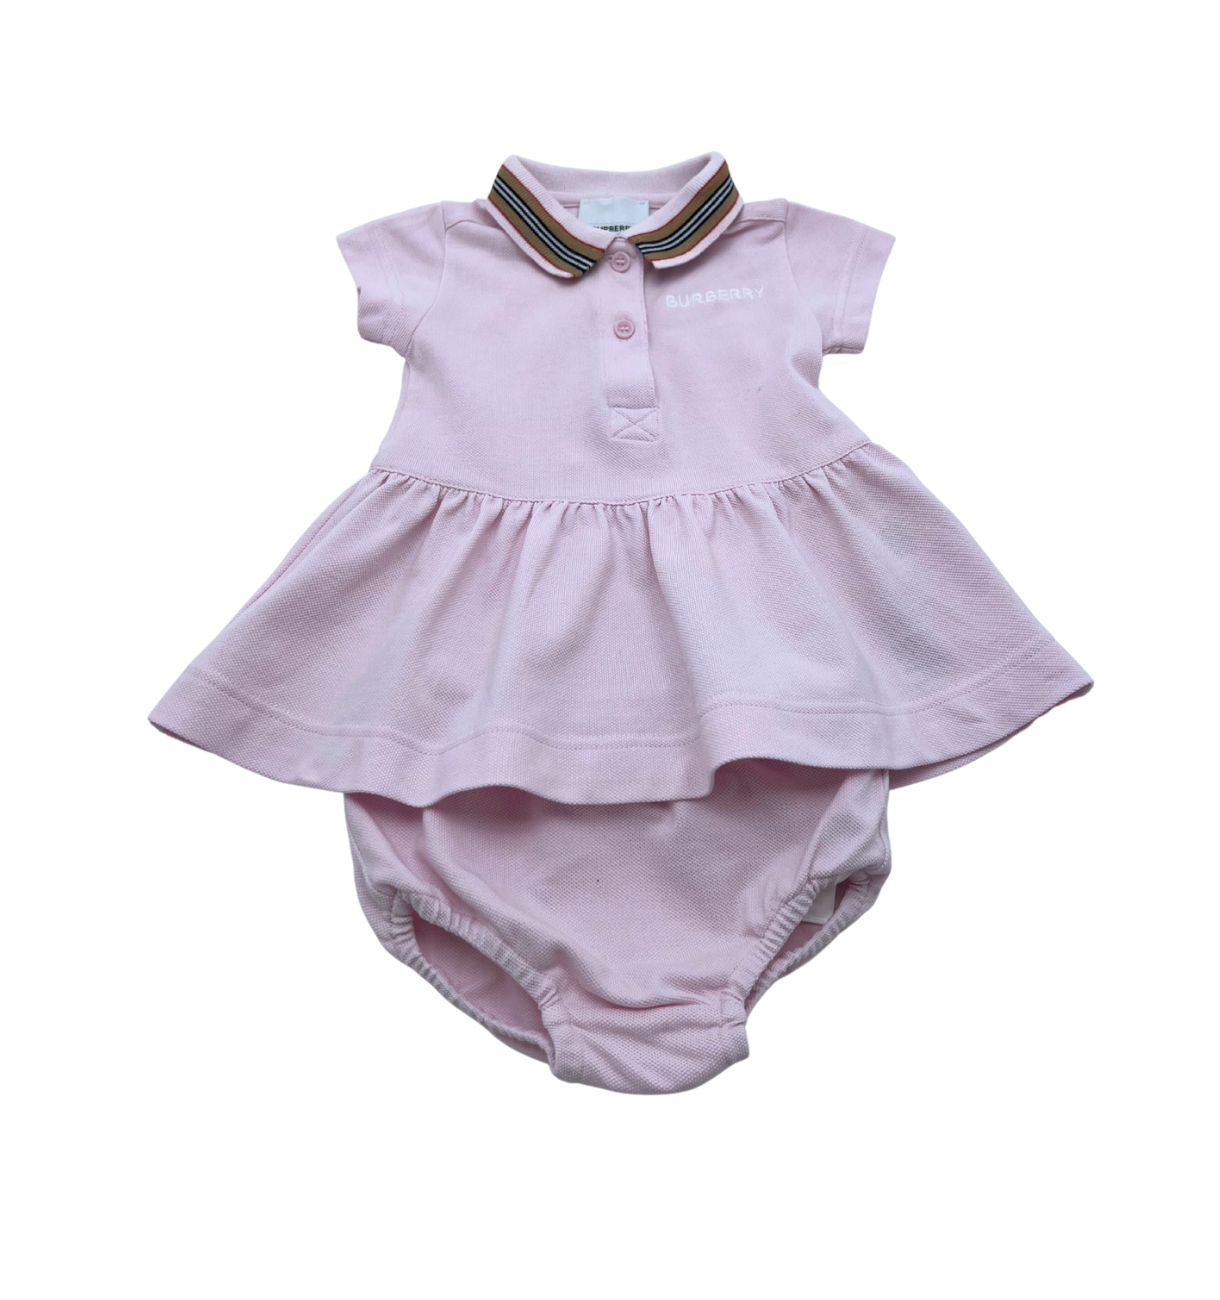 BURBERRY - Pink dress &amp; bloomers - 3 months